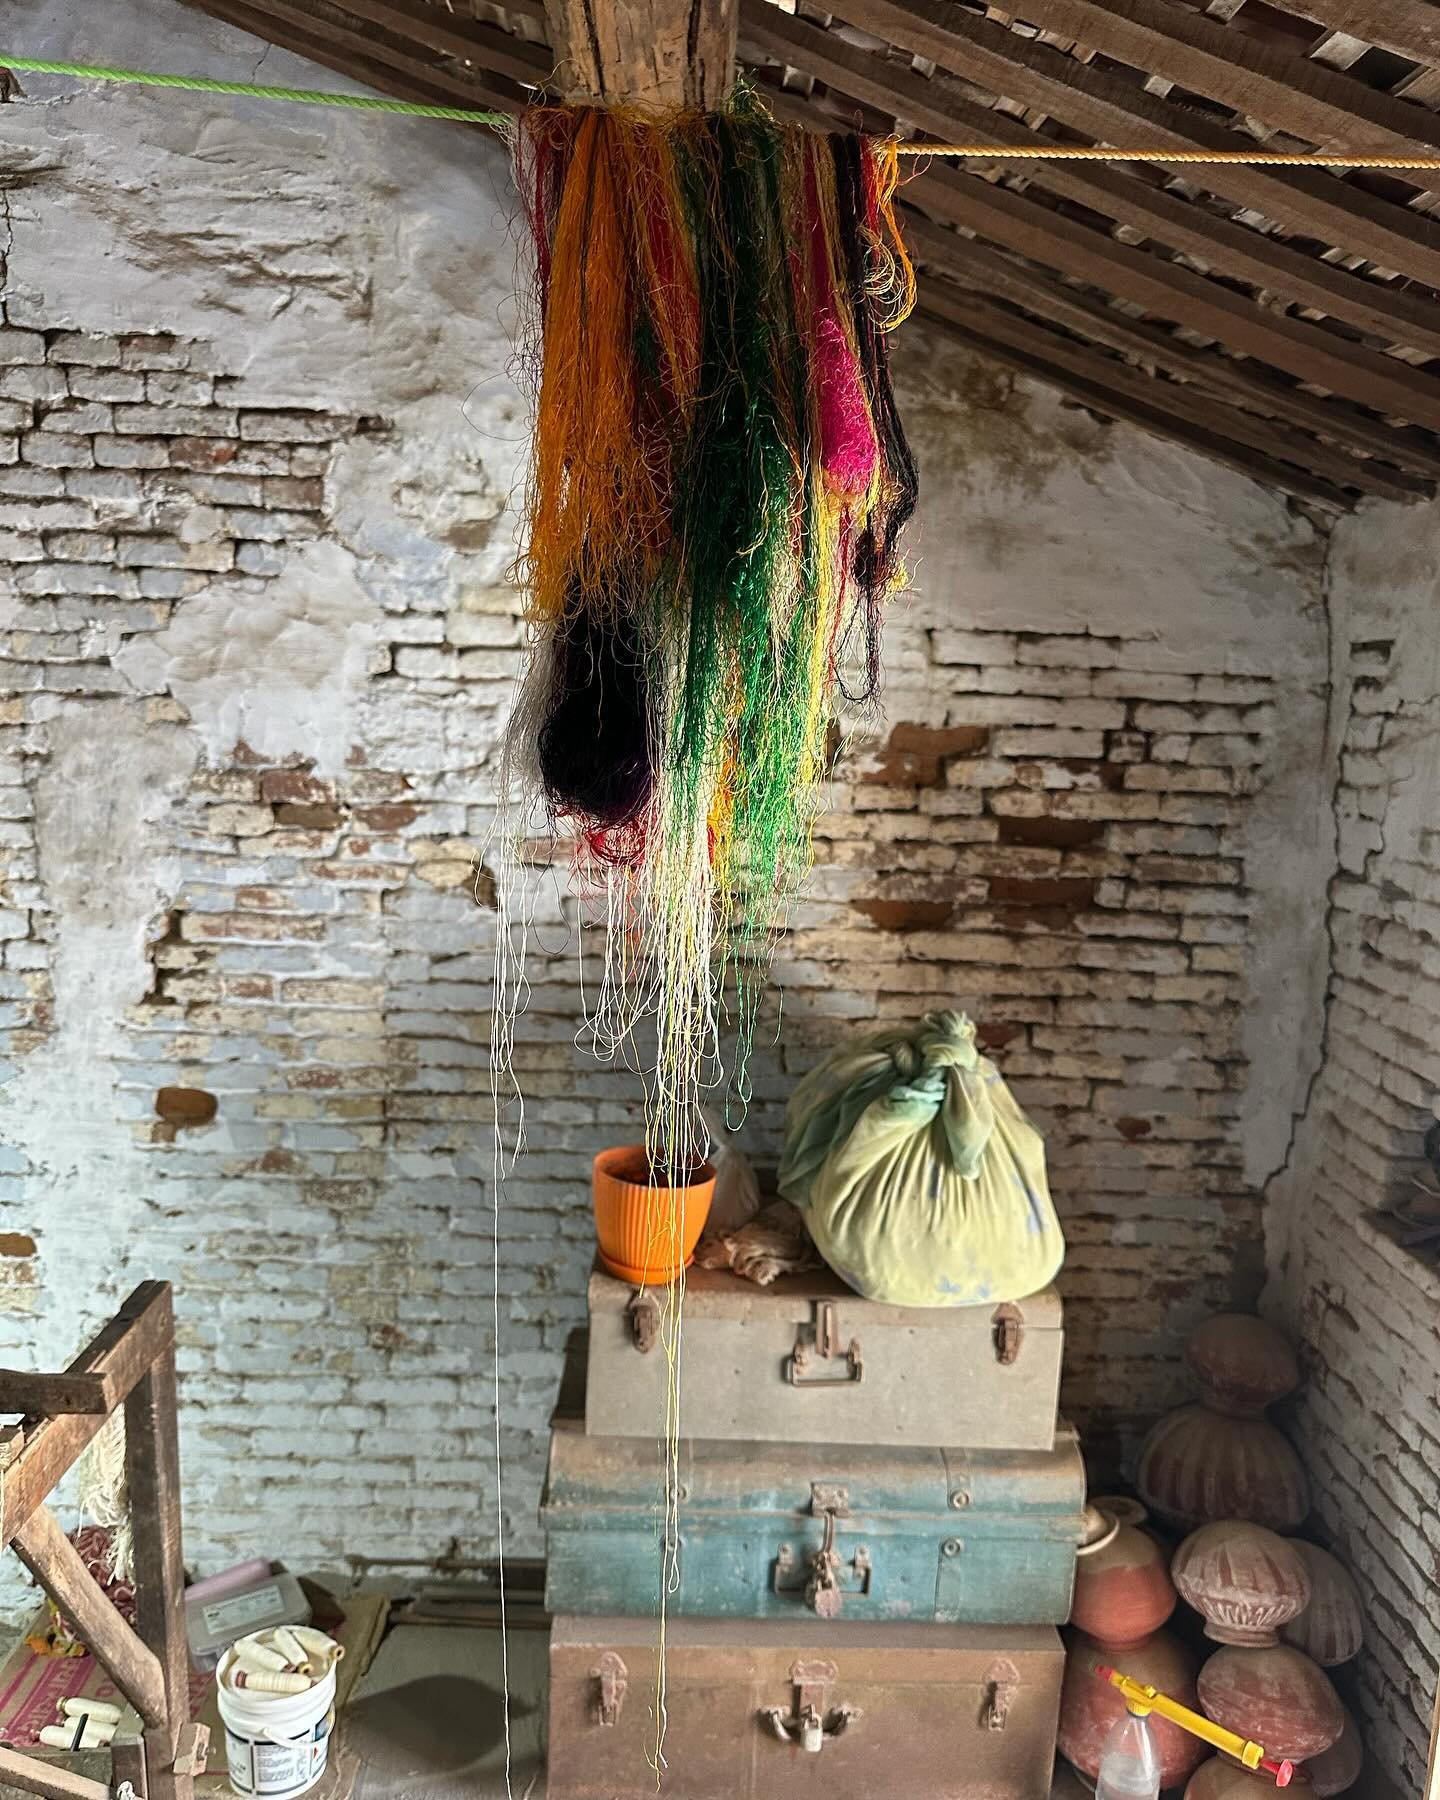 two weeks ago in Patan with the Khatris / once a booming textile center known for Patola and Silk Mashroo, there are said to be only around 15-20 mashroo weavers left working in the area. Some textile historians date mashroo back to the 11th century.